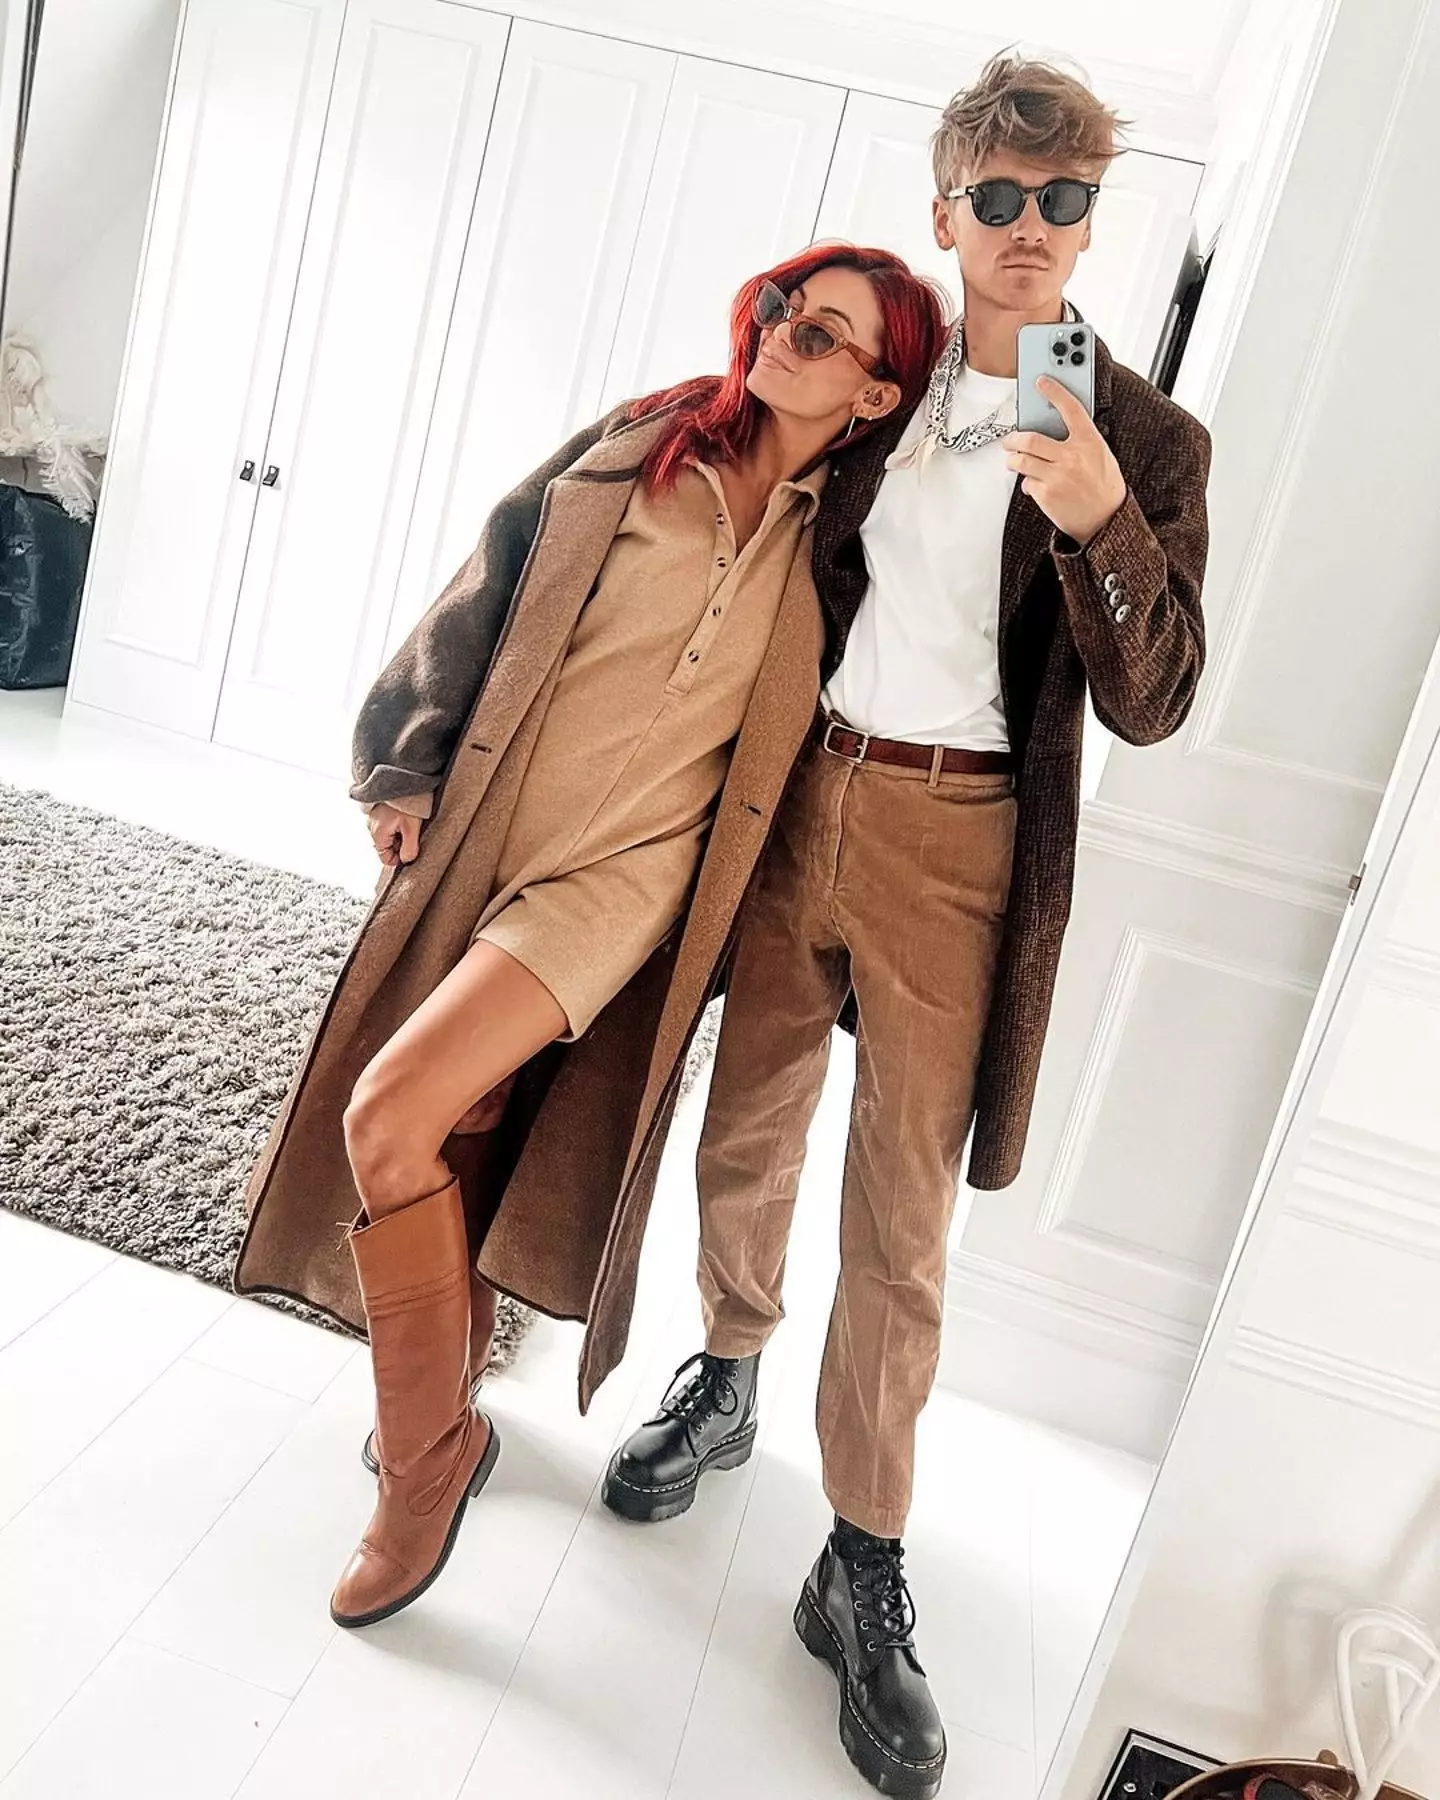 The couple posted a cute autumnal snap on Instagram.